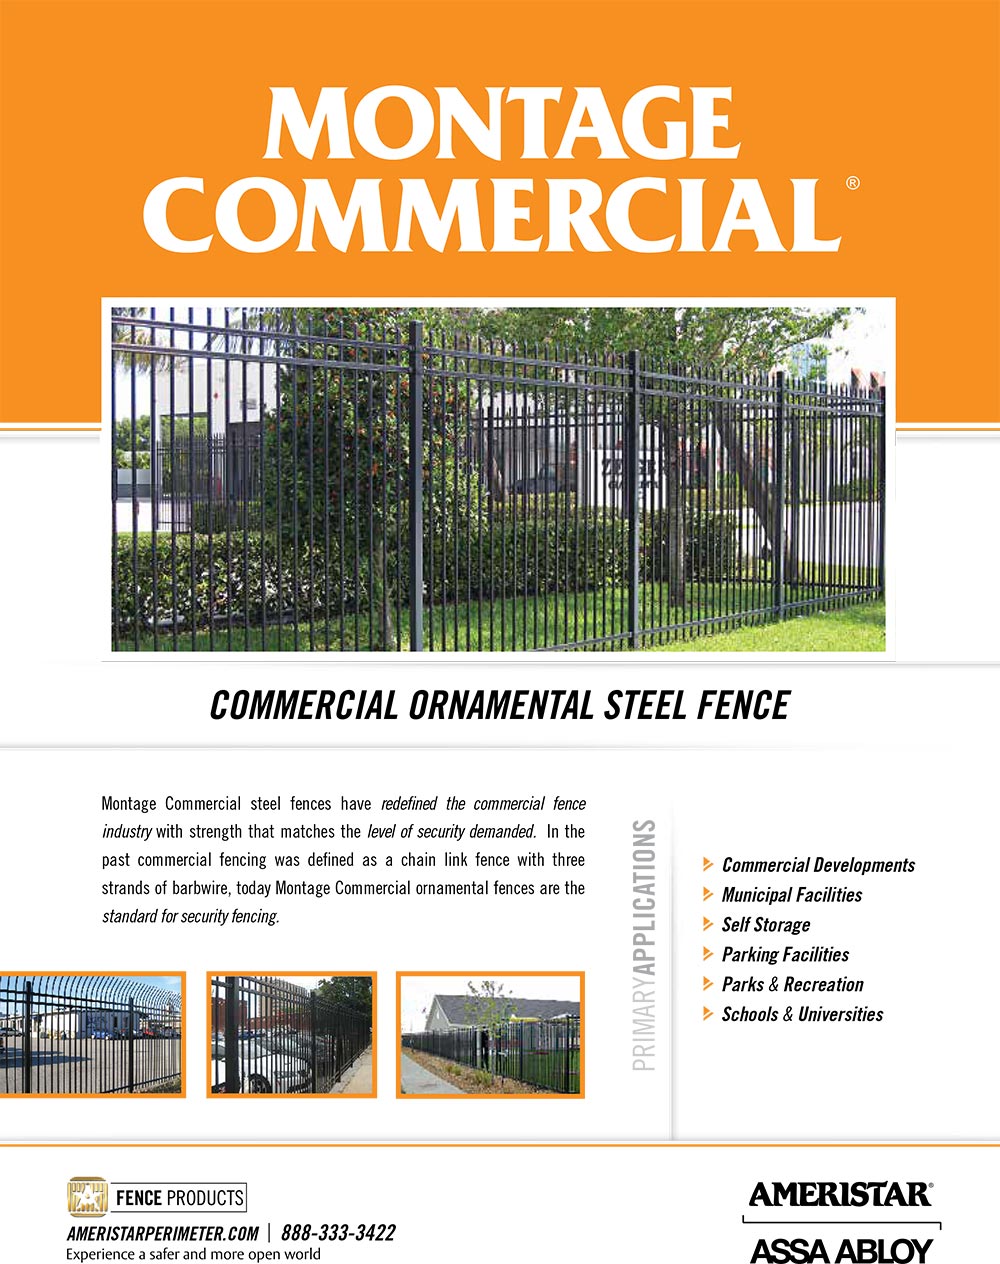 Montage Commercial Ornamental Steel Fence